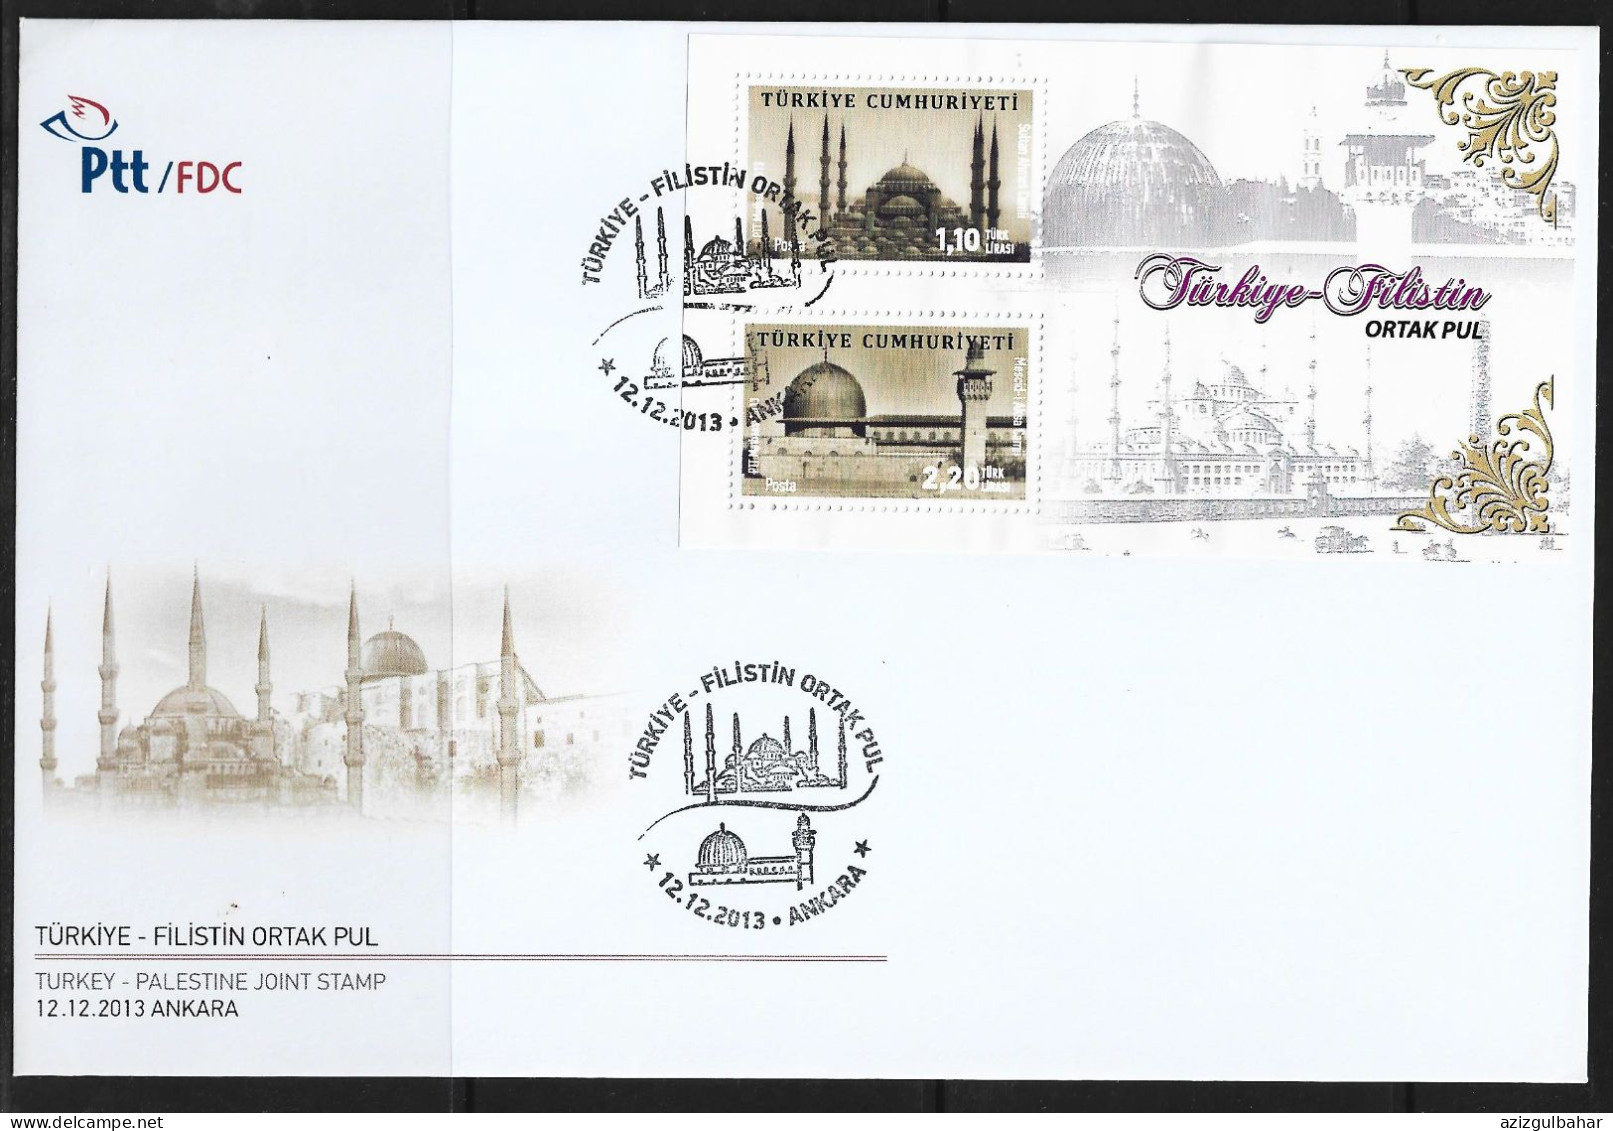 2013 - TURKEY-PALASTINE JOINT STAMP  - 12TH DECEMBER 2013 - FDC - FDC